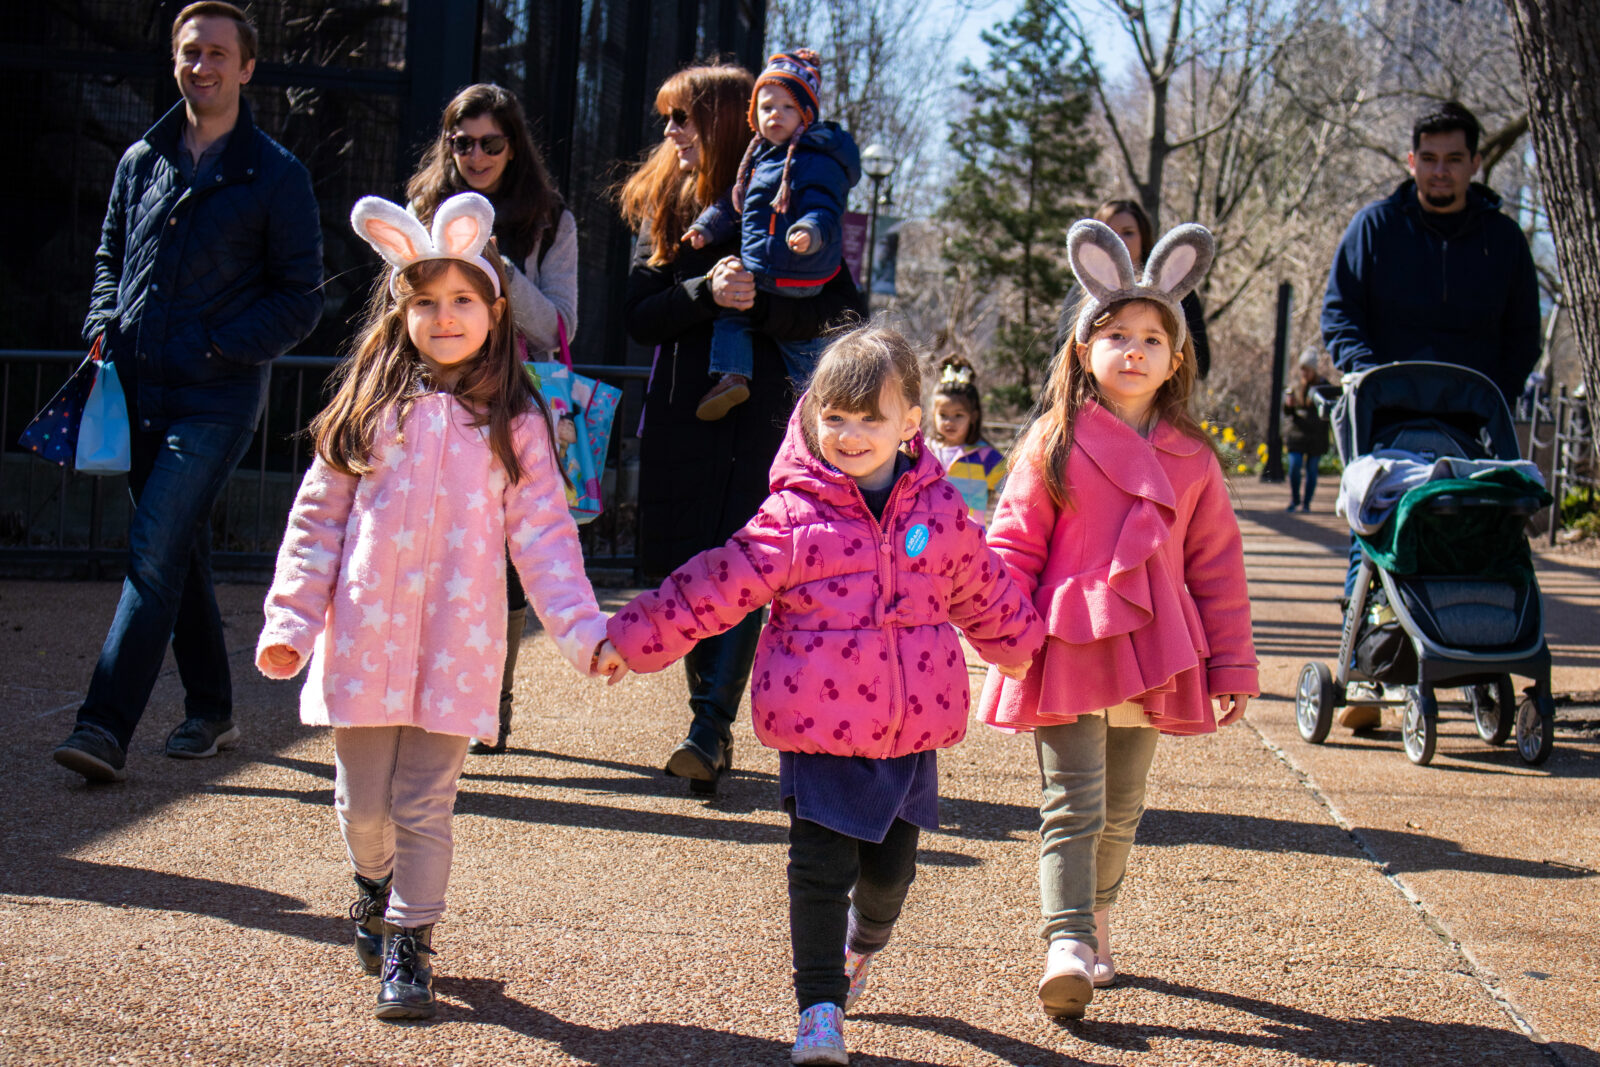 Spring Egg-Stravaganza Returns for Family-Friendly Egg Hunts at Lincoln Park Zoo